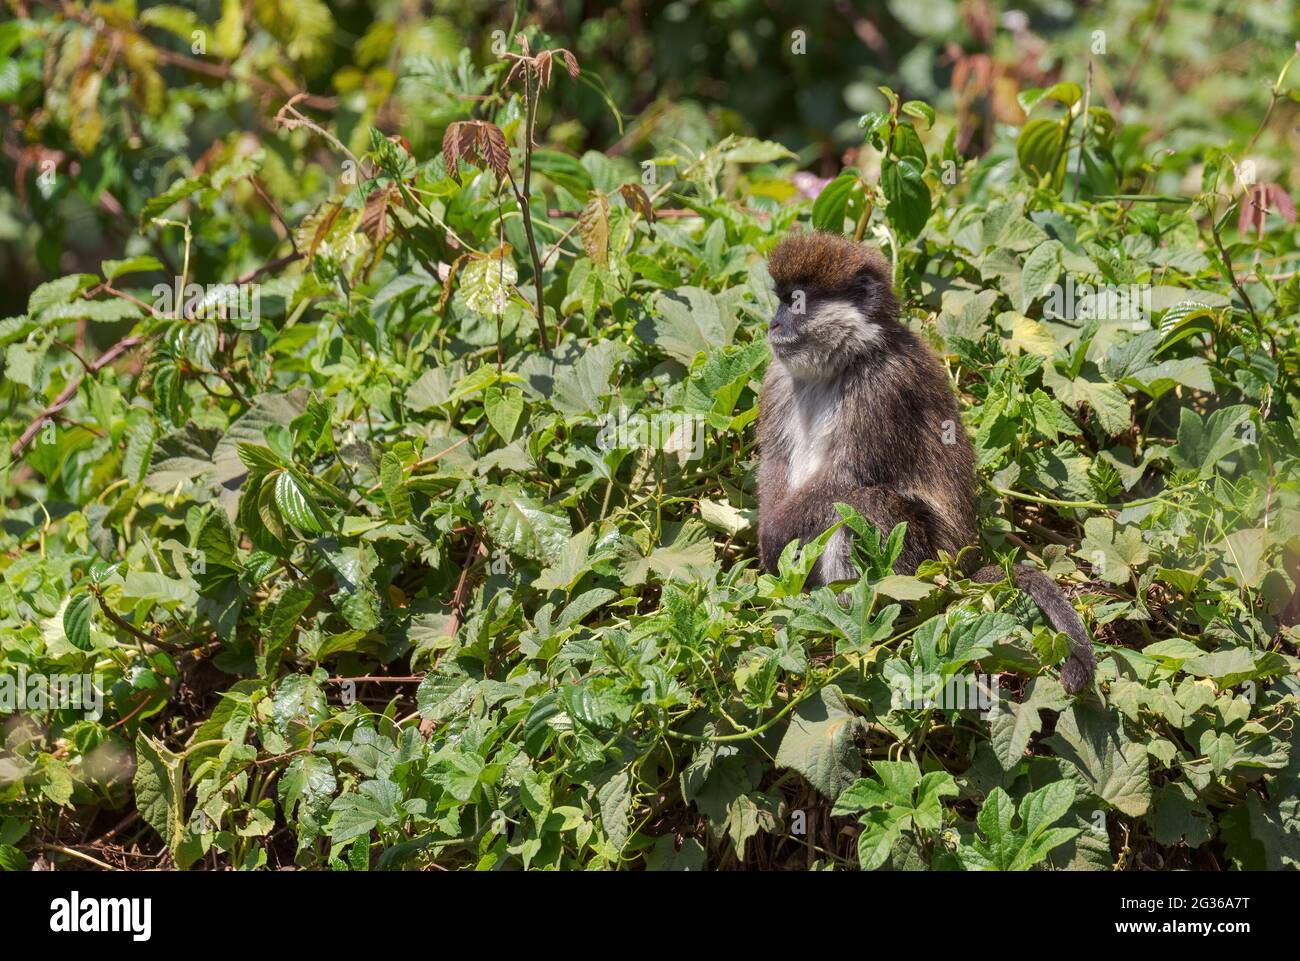 Bale Mountains Monkey - Chlorocebus djamdjamensis, endemic endangered primate from Bale mountains and Harrena forest, Ethiopia. Stock Photo